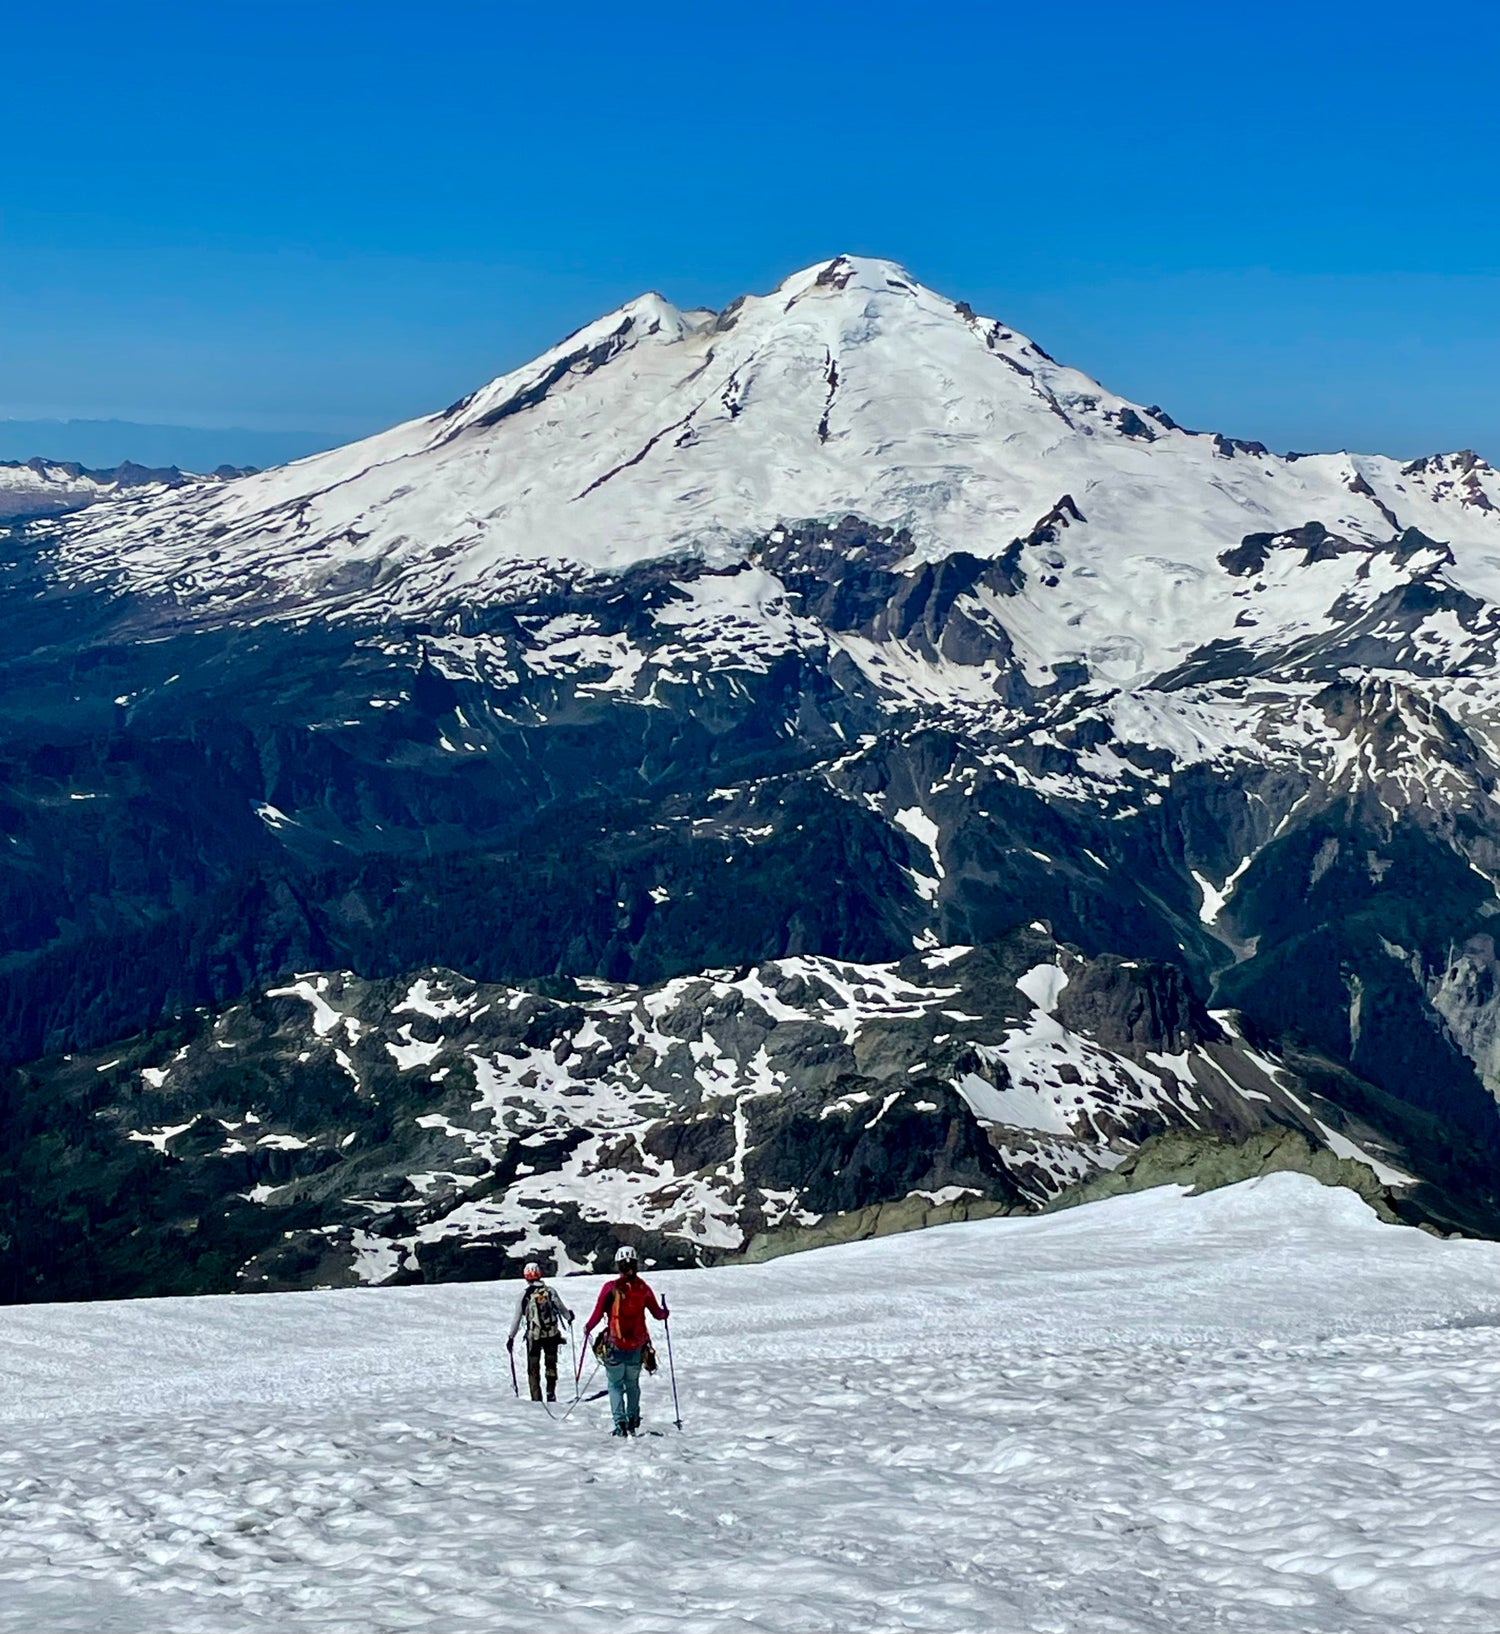 Climbers walking down after a successful summit, with views of Mount Baker in the background.  